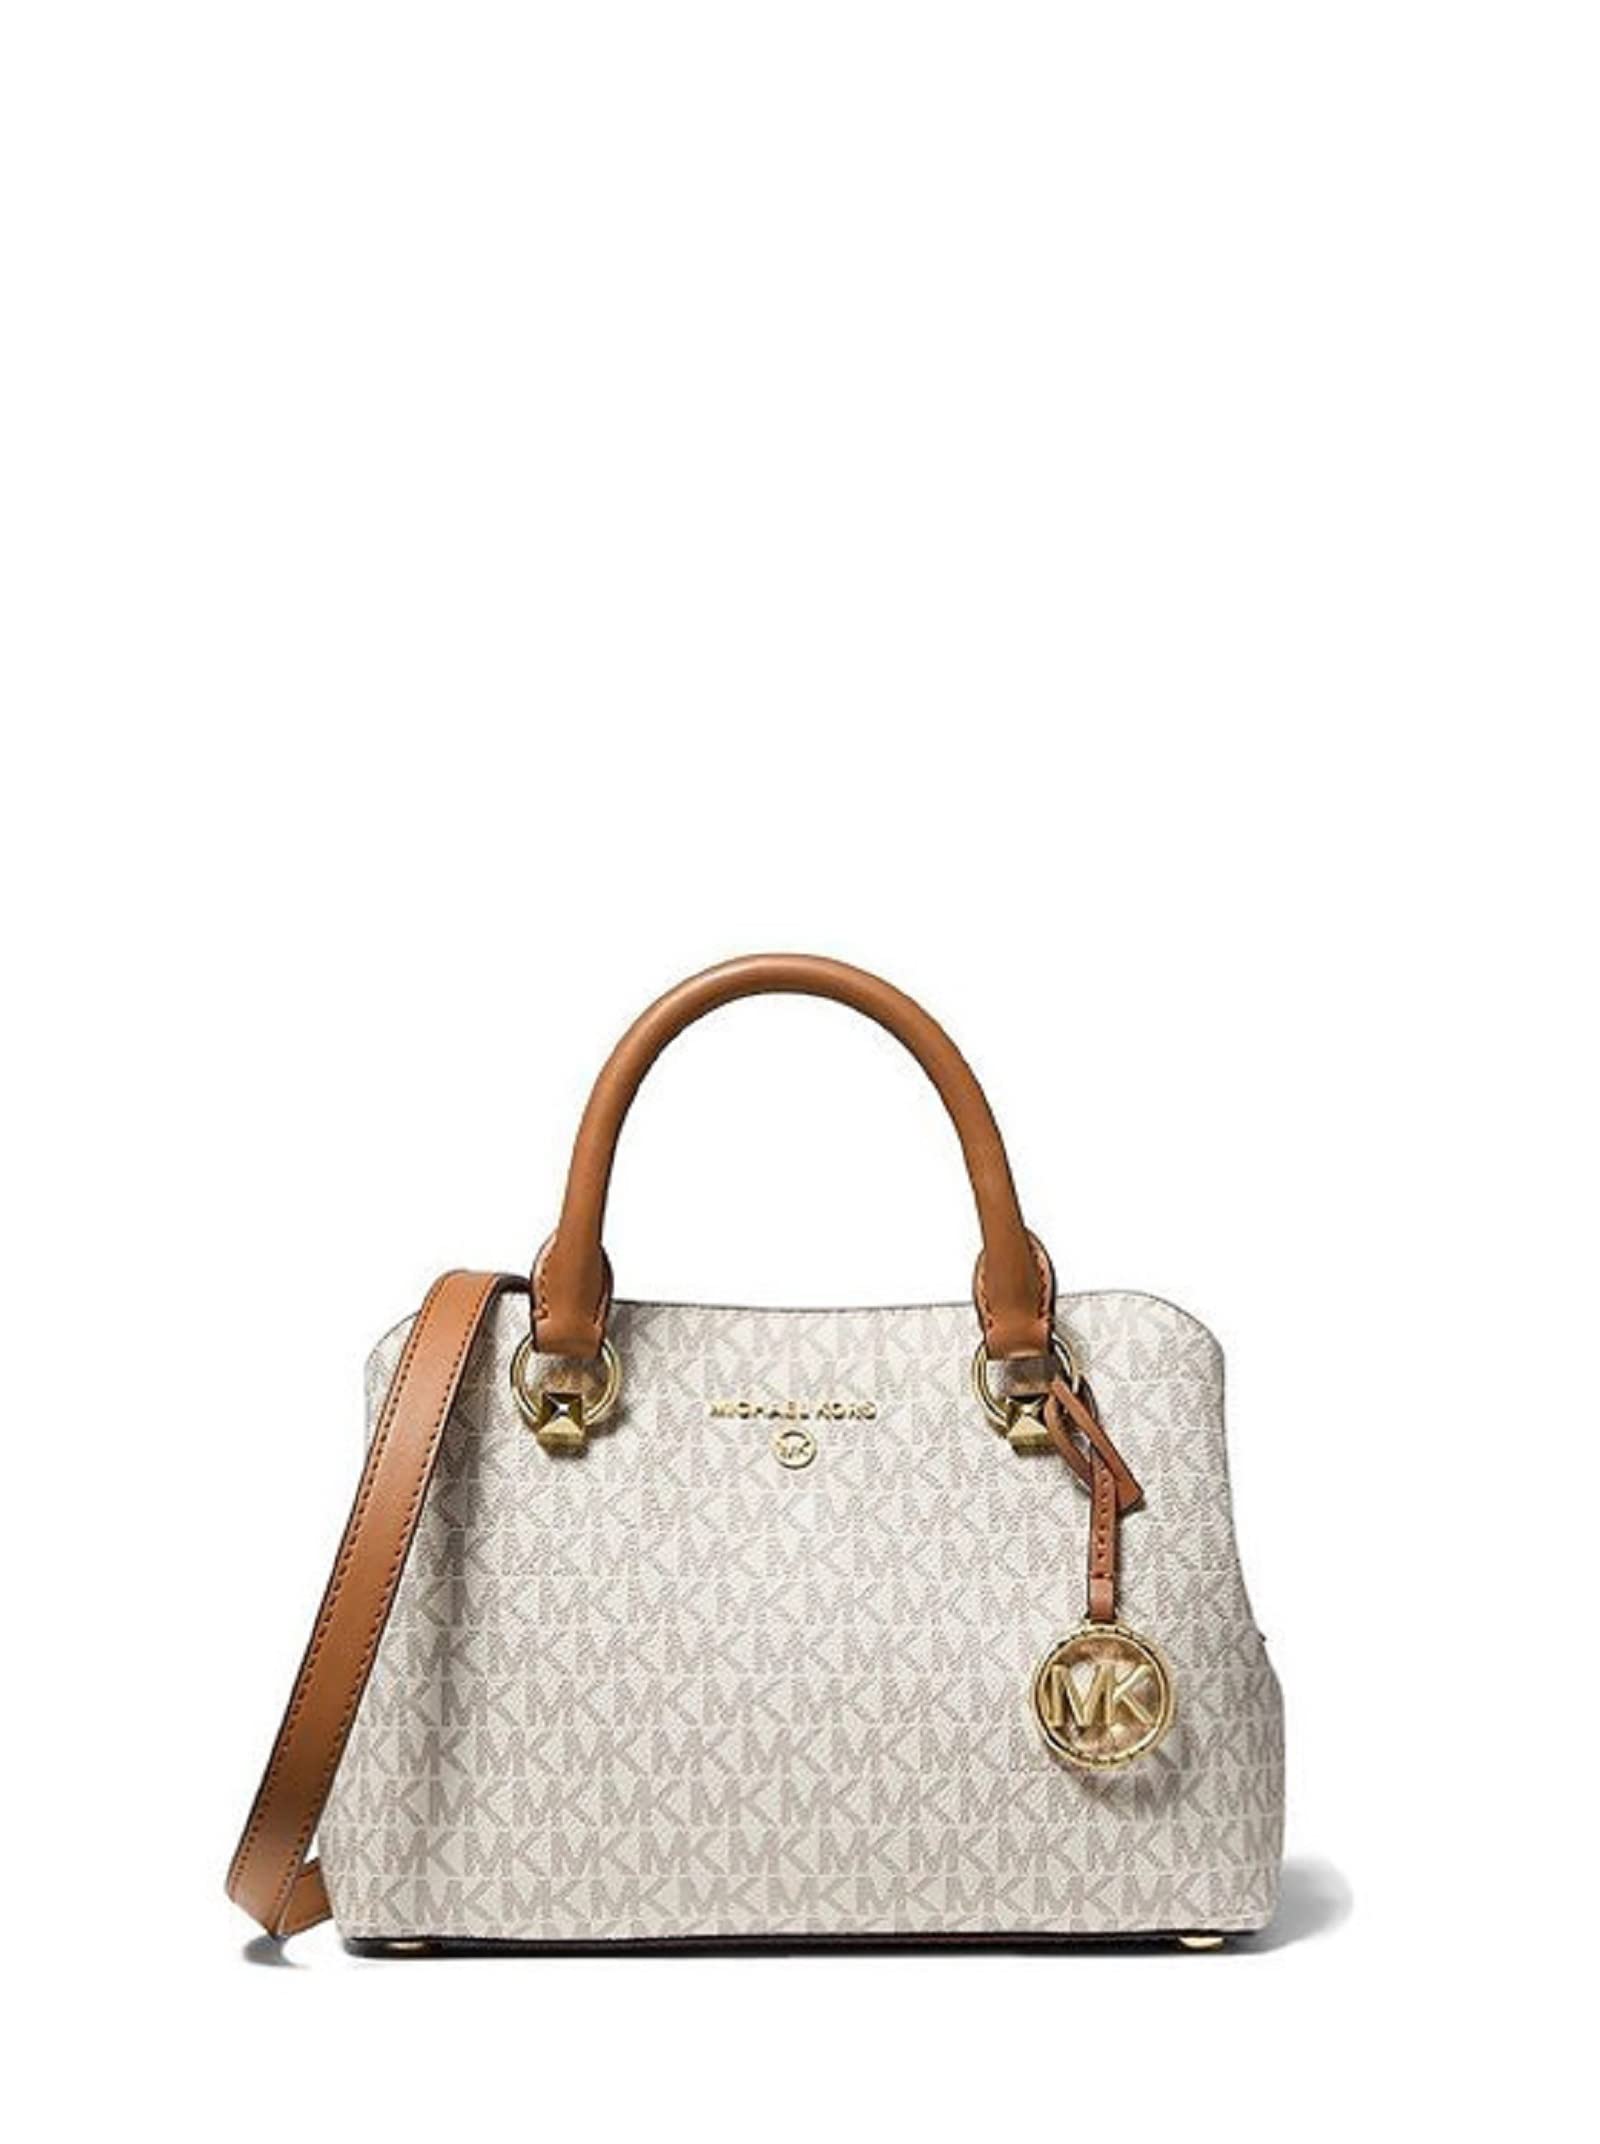 Michael Kors bags Save 70 on this toprated leather satchel